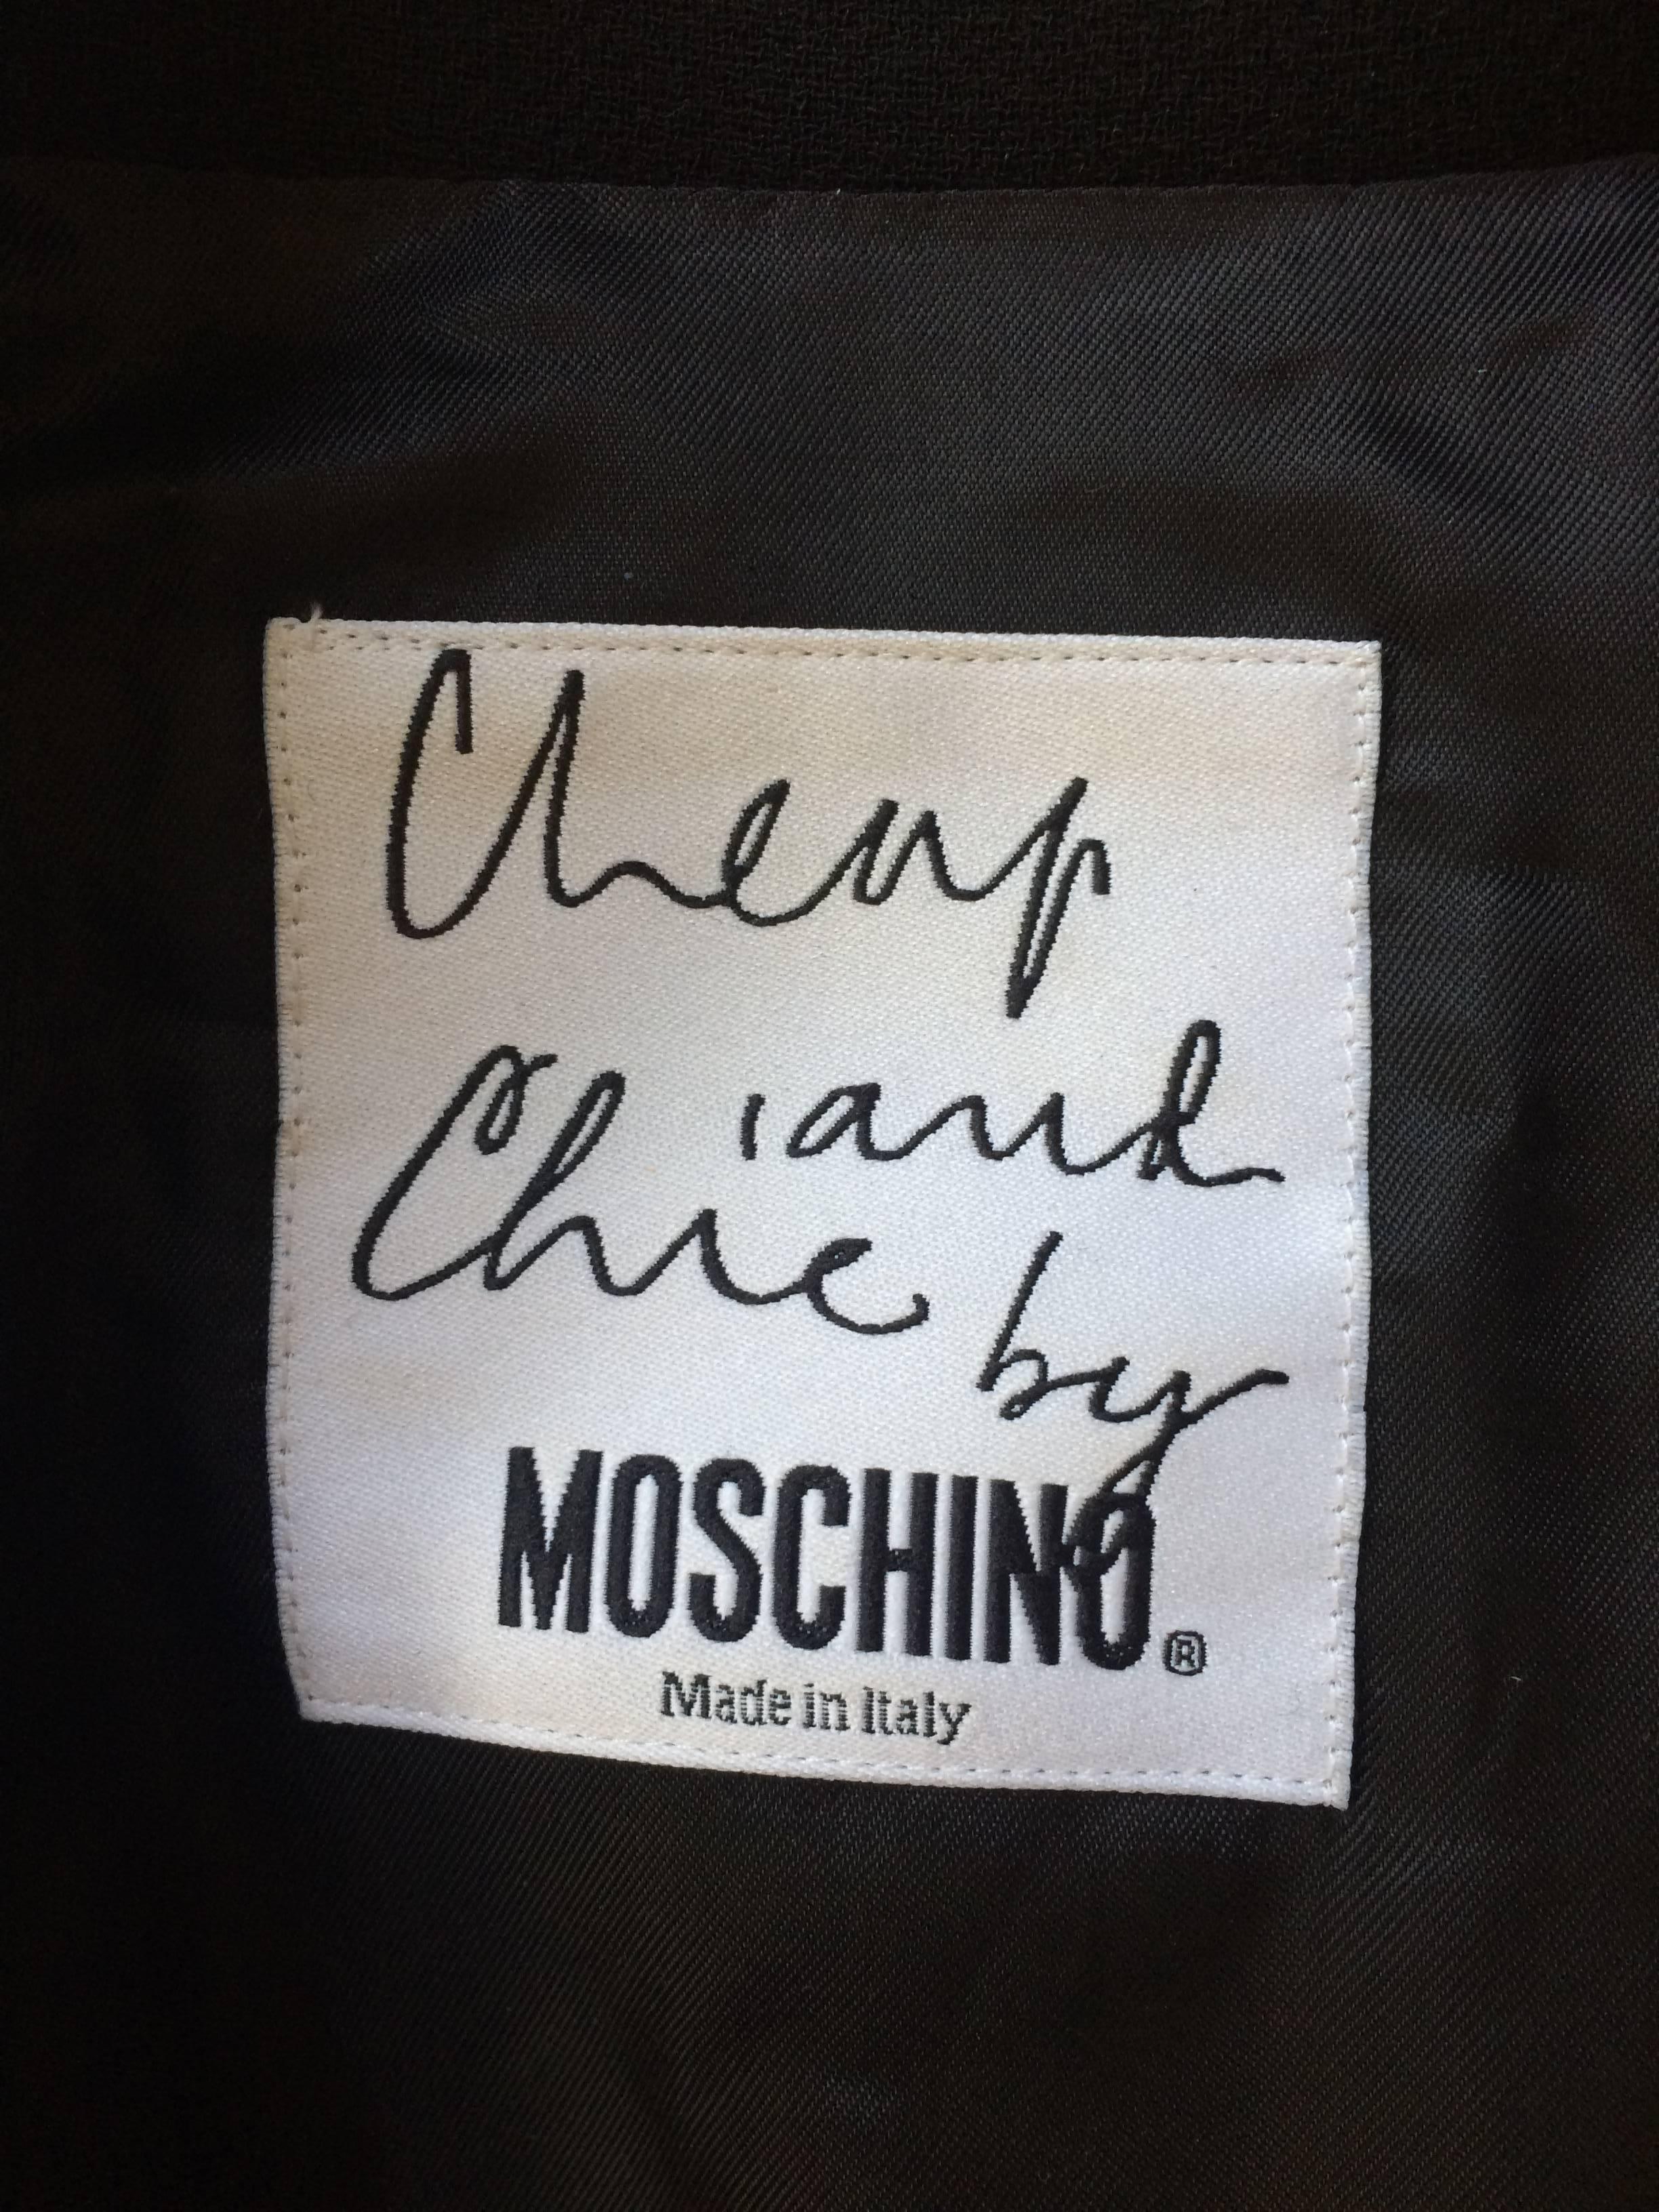 Moschino Cheap & Chic Black Chain & Ring Dress Suit 3